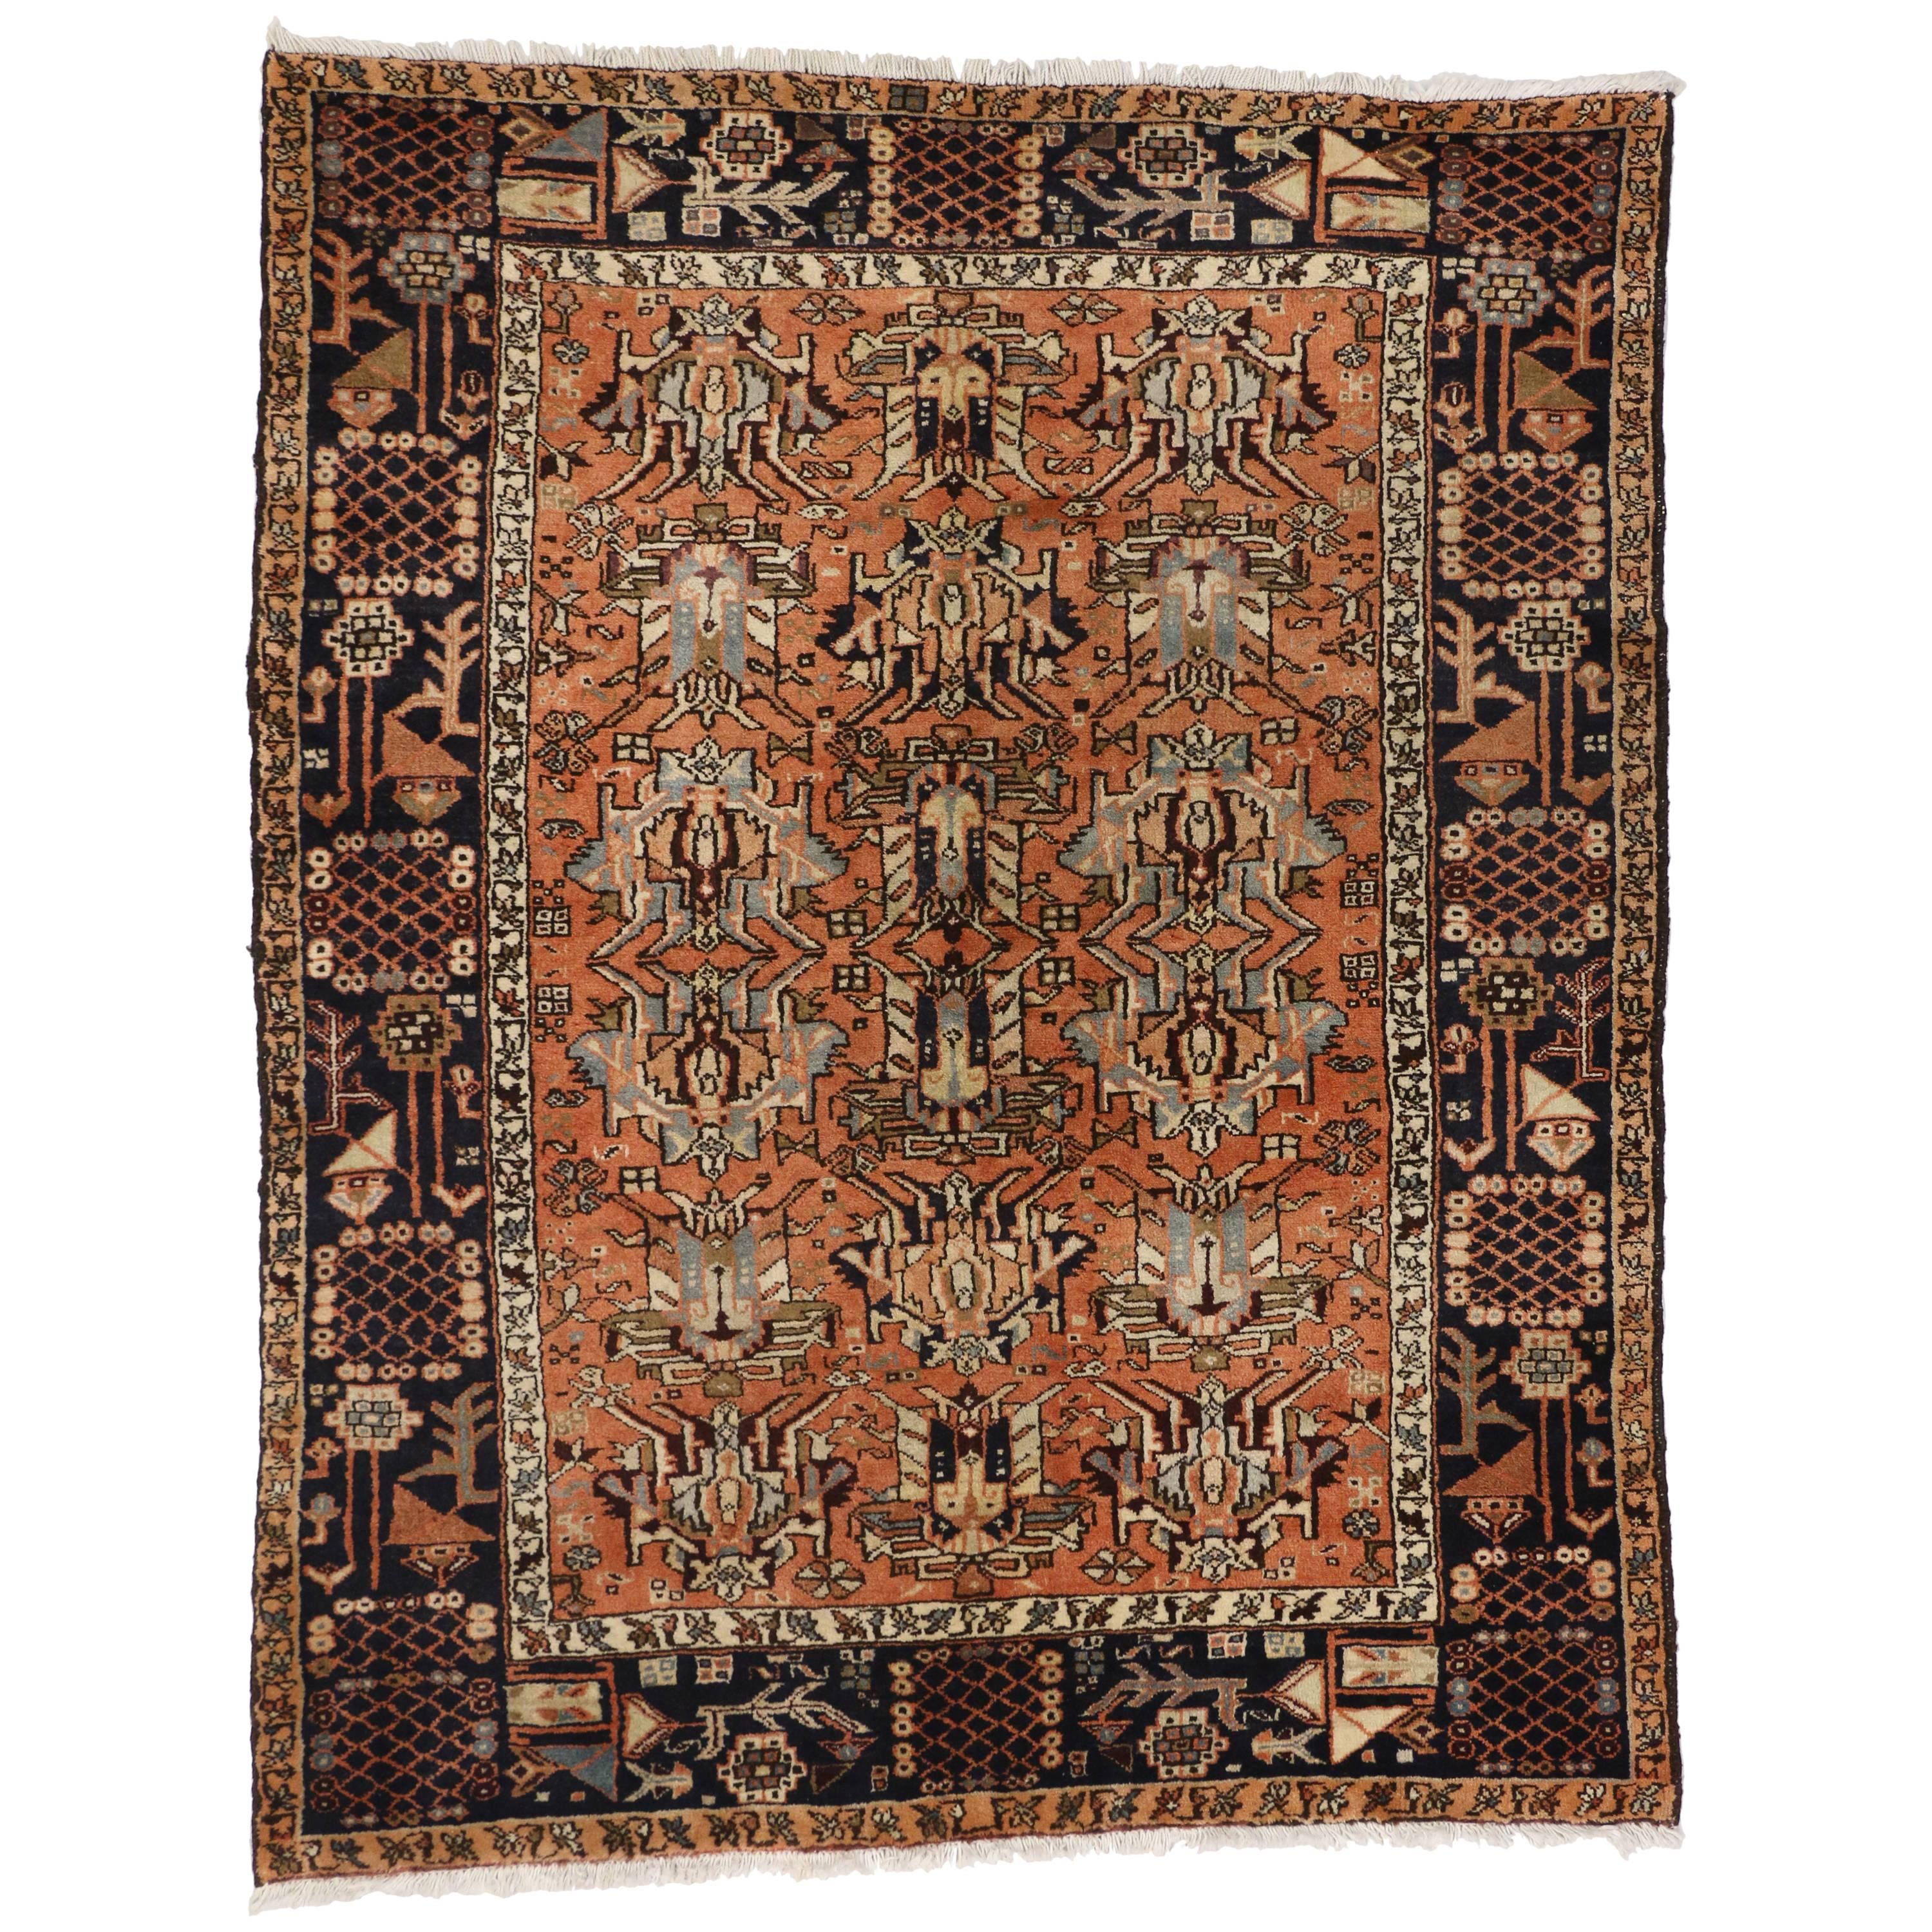 Antique Persian Heriz Rug with Mid-Century Modern Tribal Style